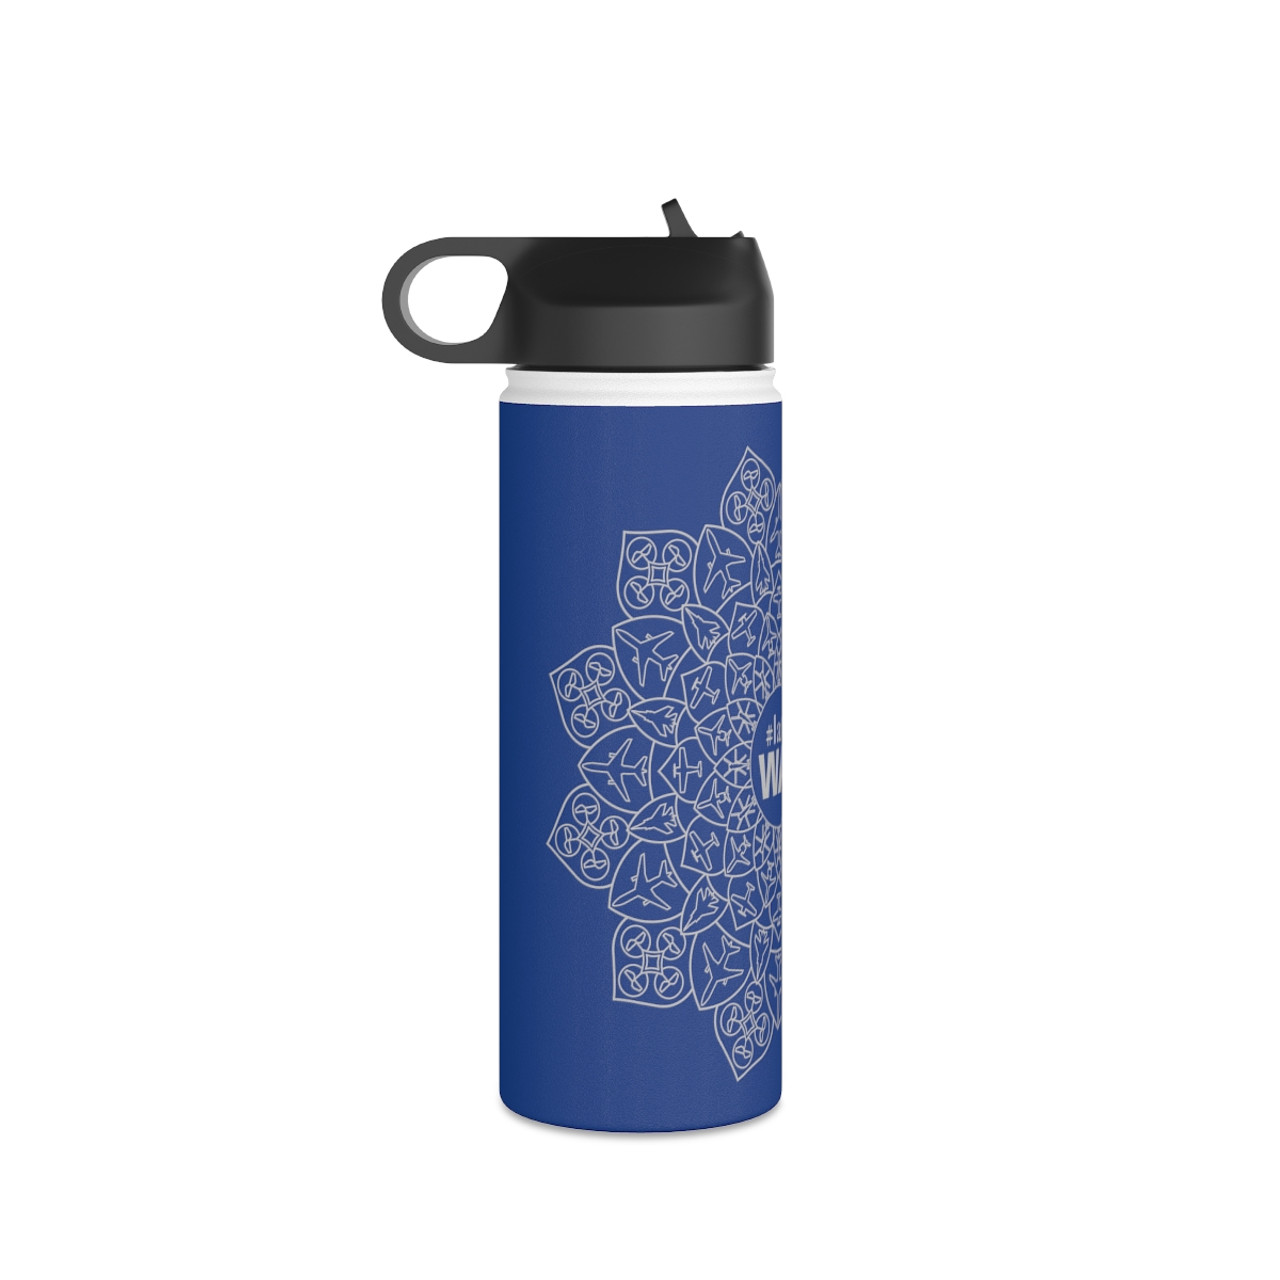 https://cdn11.bigcommerce.com/s-sqlllpksfp/images/stencil/1280x1280/products/216/806/18-oz-double-wall-stainless-steel-water-bottle__60523.1696437887.jpg?c=1?imbypass=on